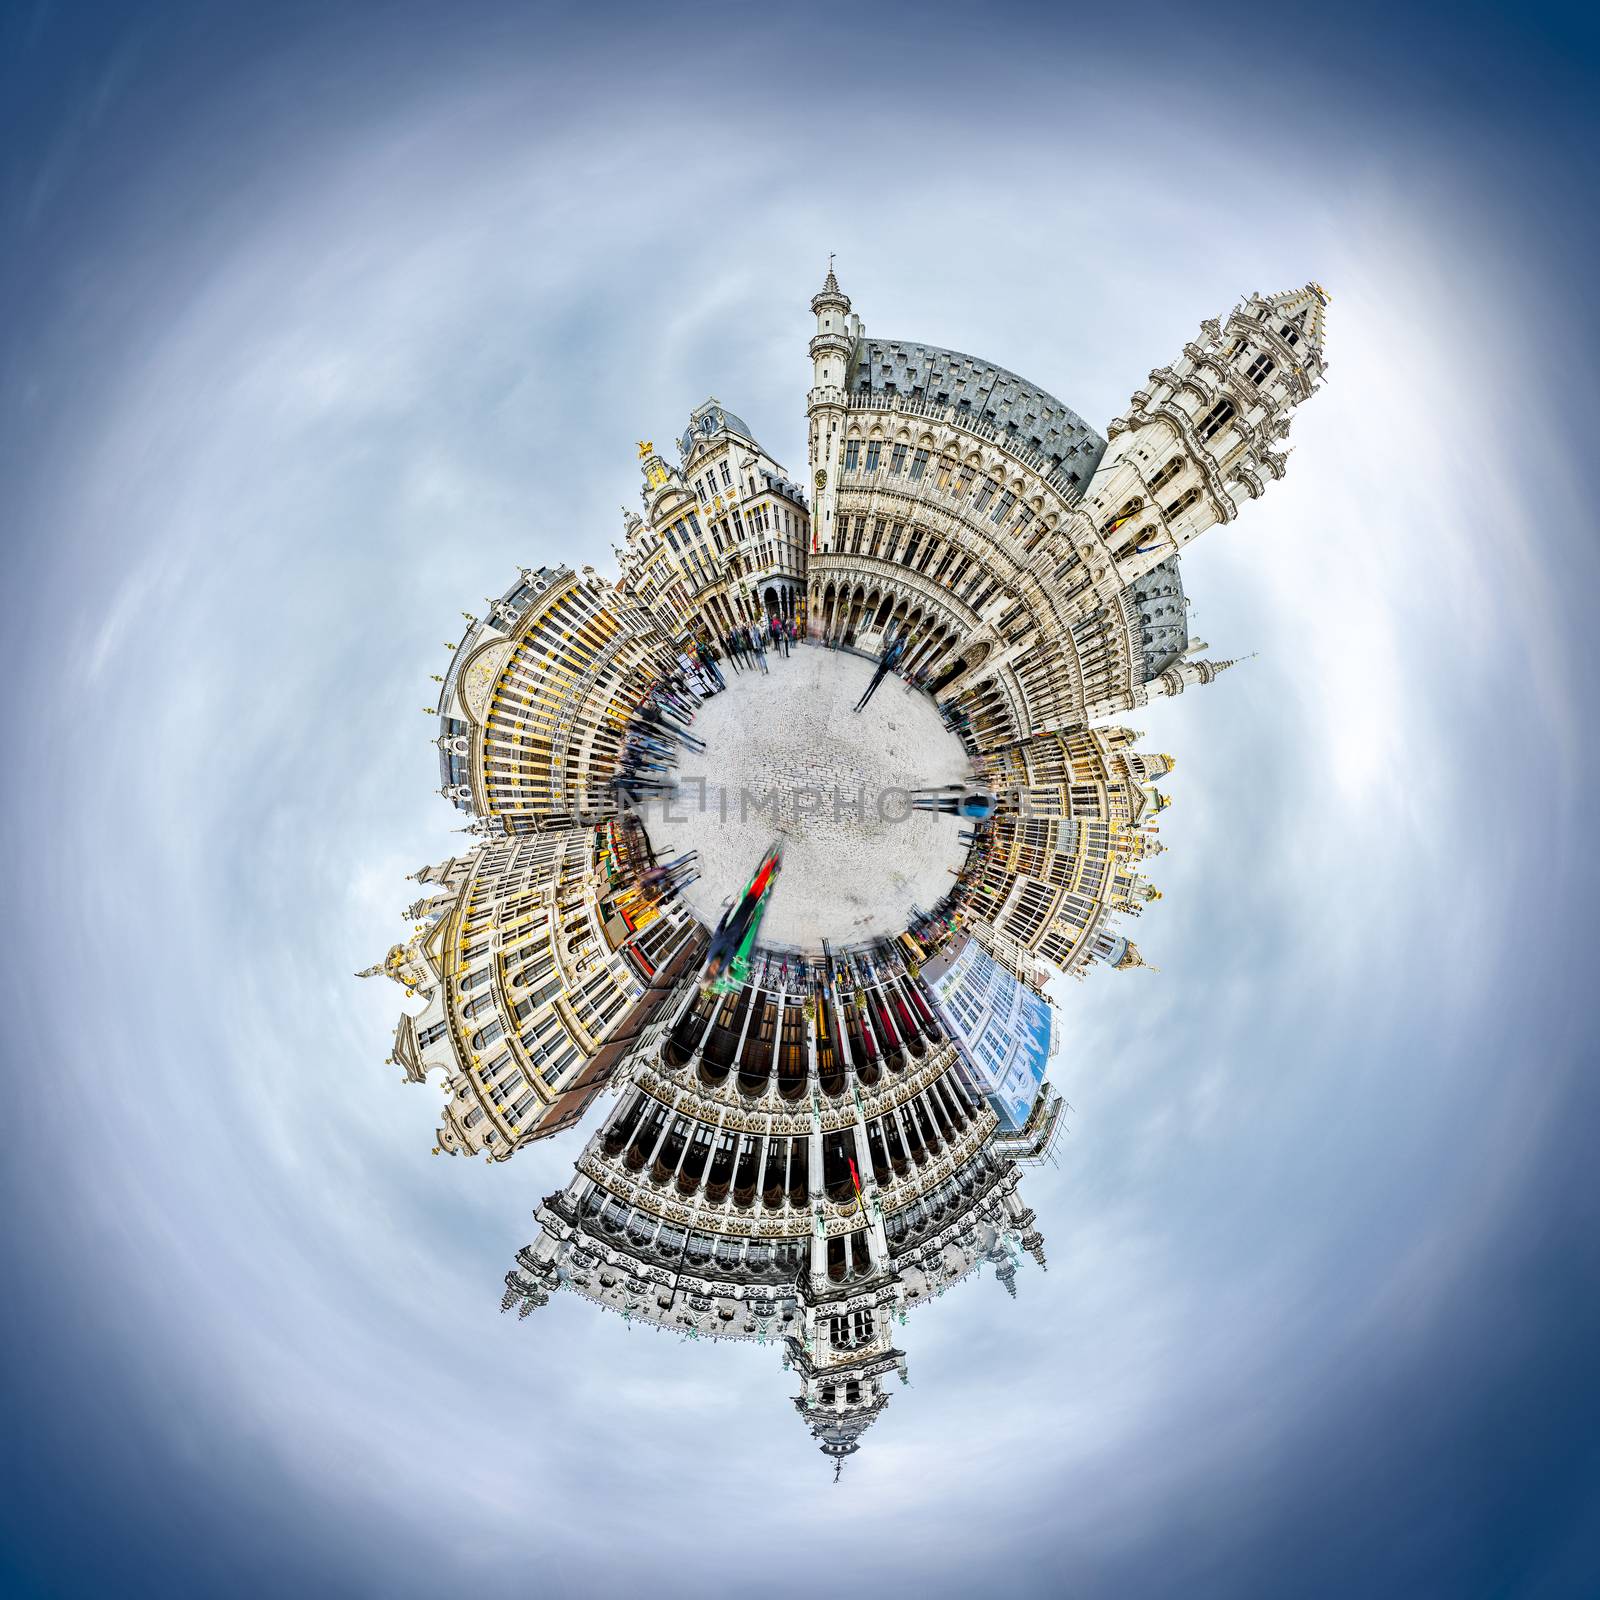 Brussels grand place panorama by ints